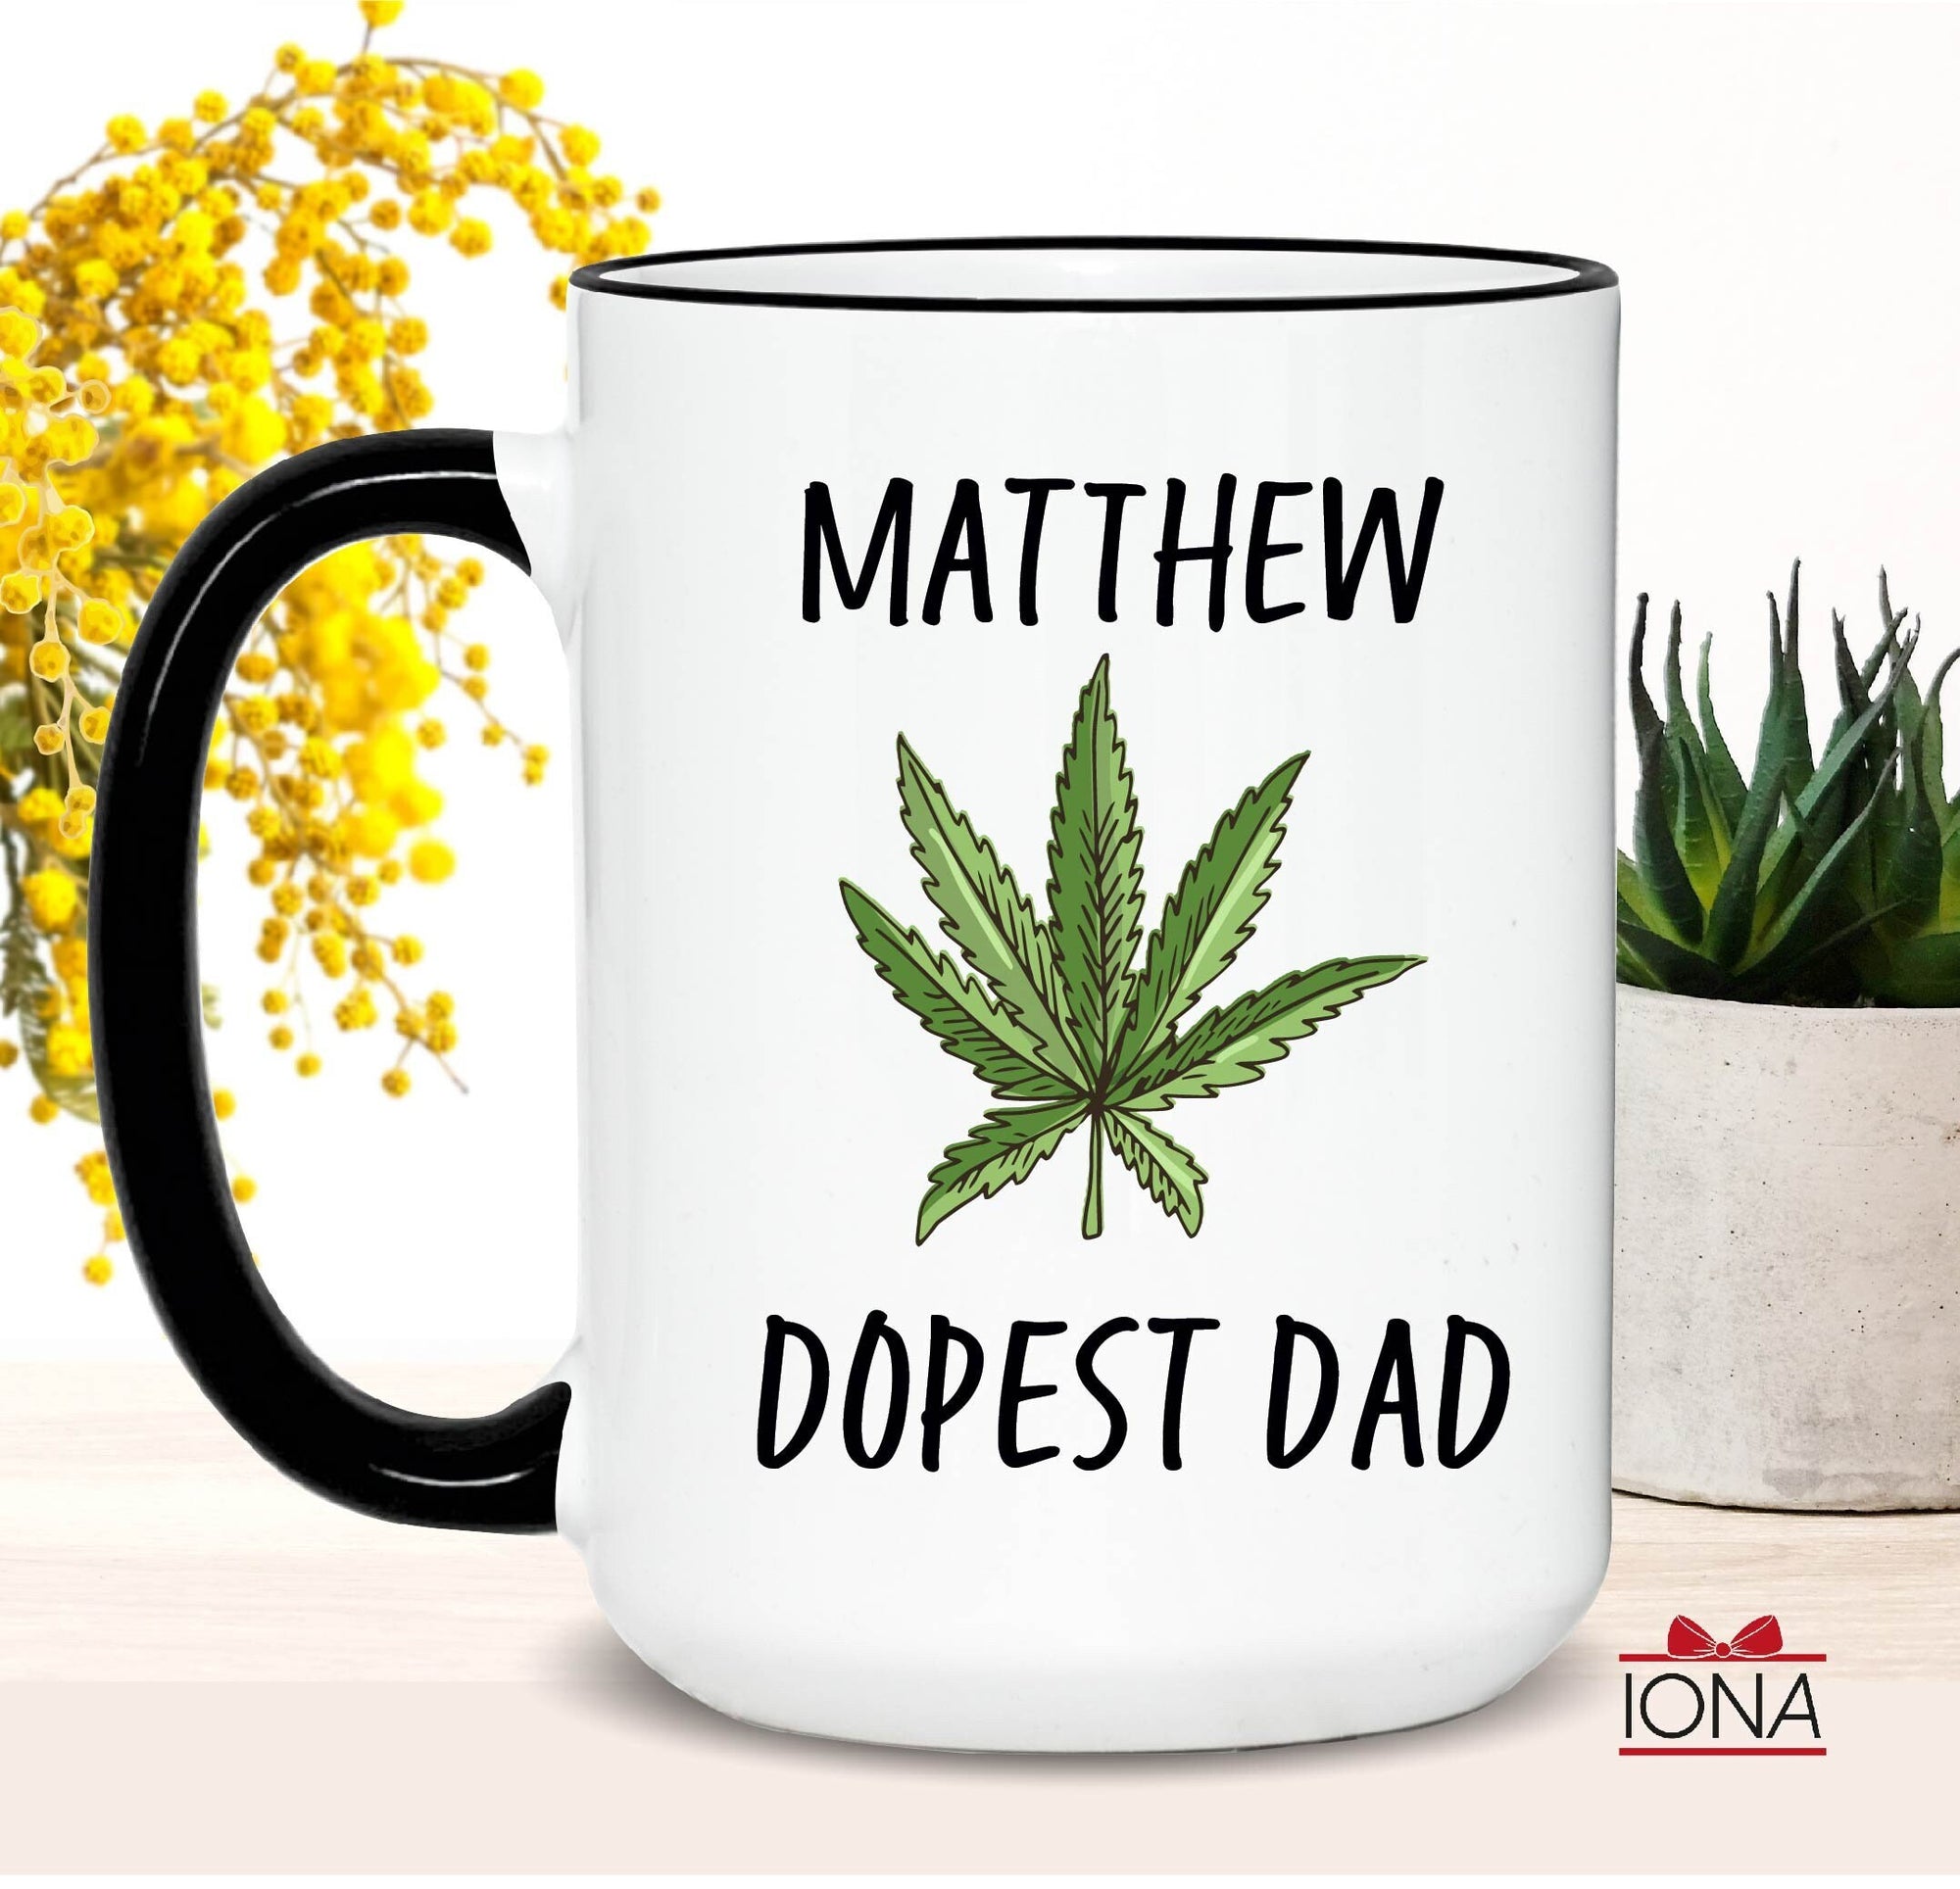 Dopest Dad Coffee Mug, Personalized Dad Birthday Gift, New Dad Gifts, Funny Birthday Gift for Dad , Dad Tea Cup, Best Fucking Dad Ever Ideas